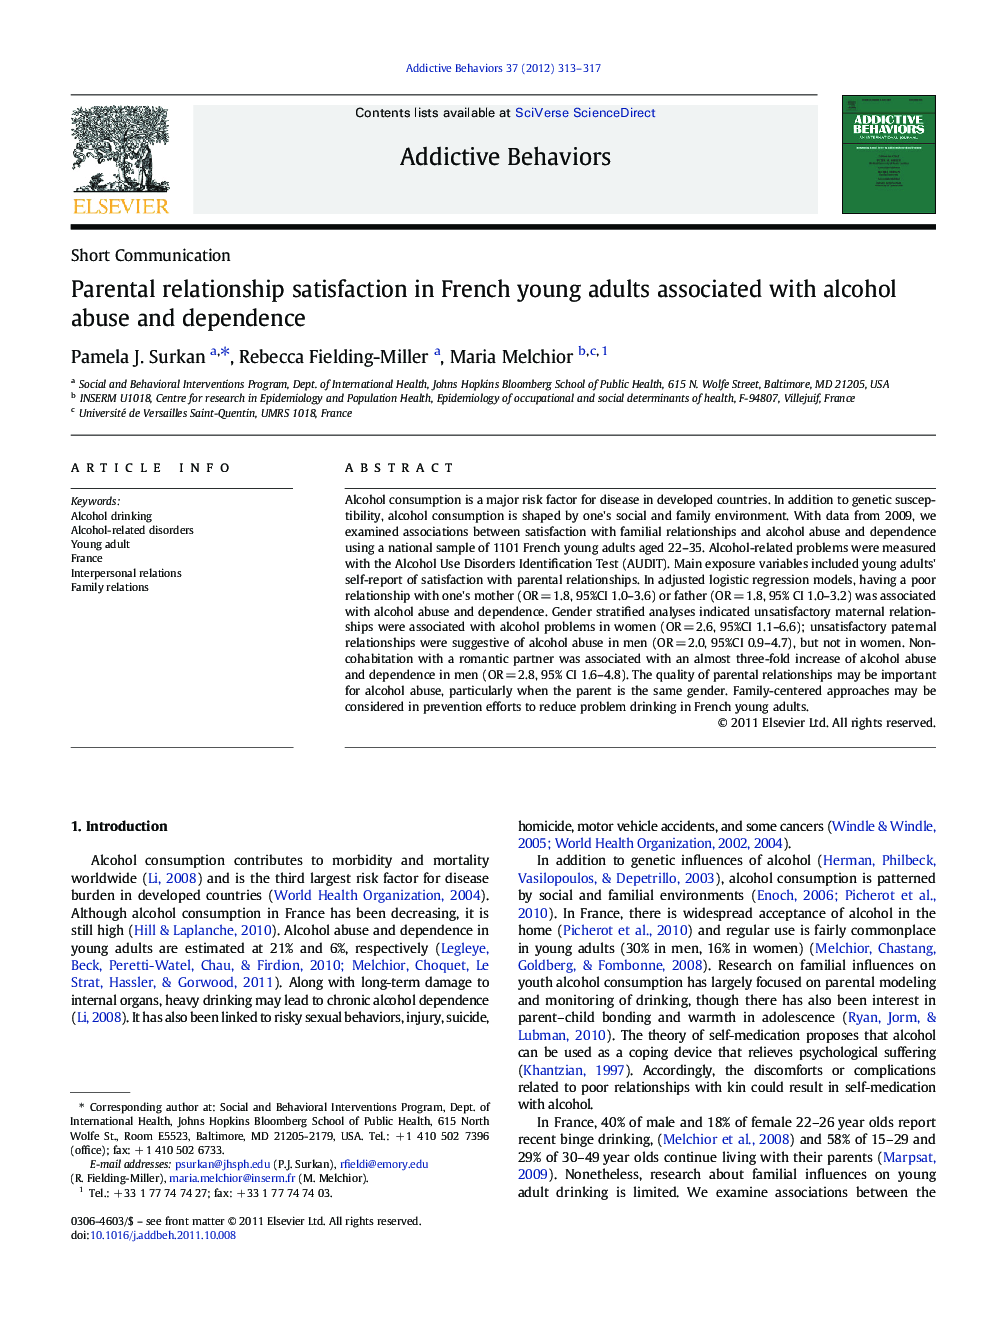 Parental relationship satisfaction in French young adults associated with alcohol abuse and dependence